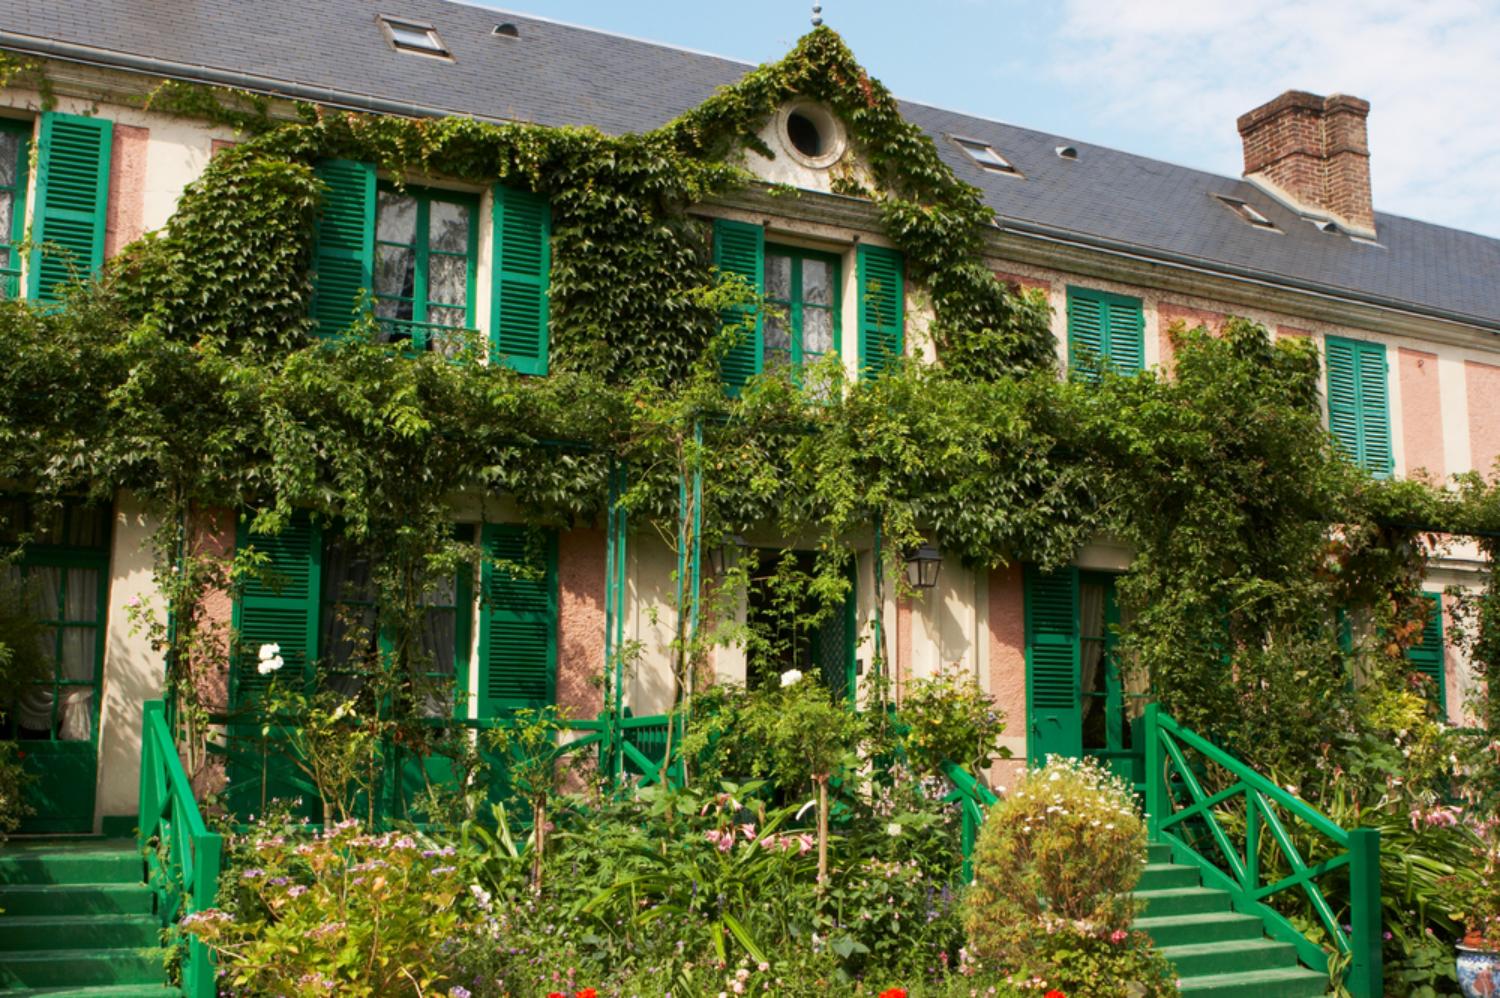 Visit Giverny & Monet's House in the morning - 8:15 am